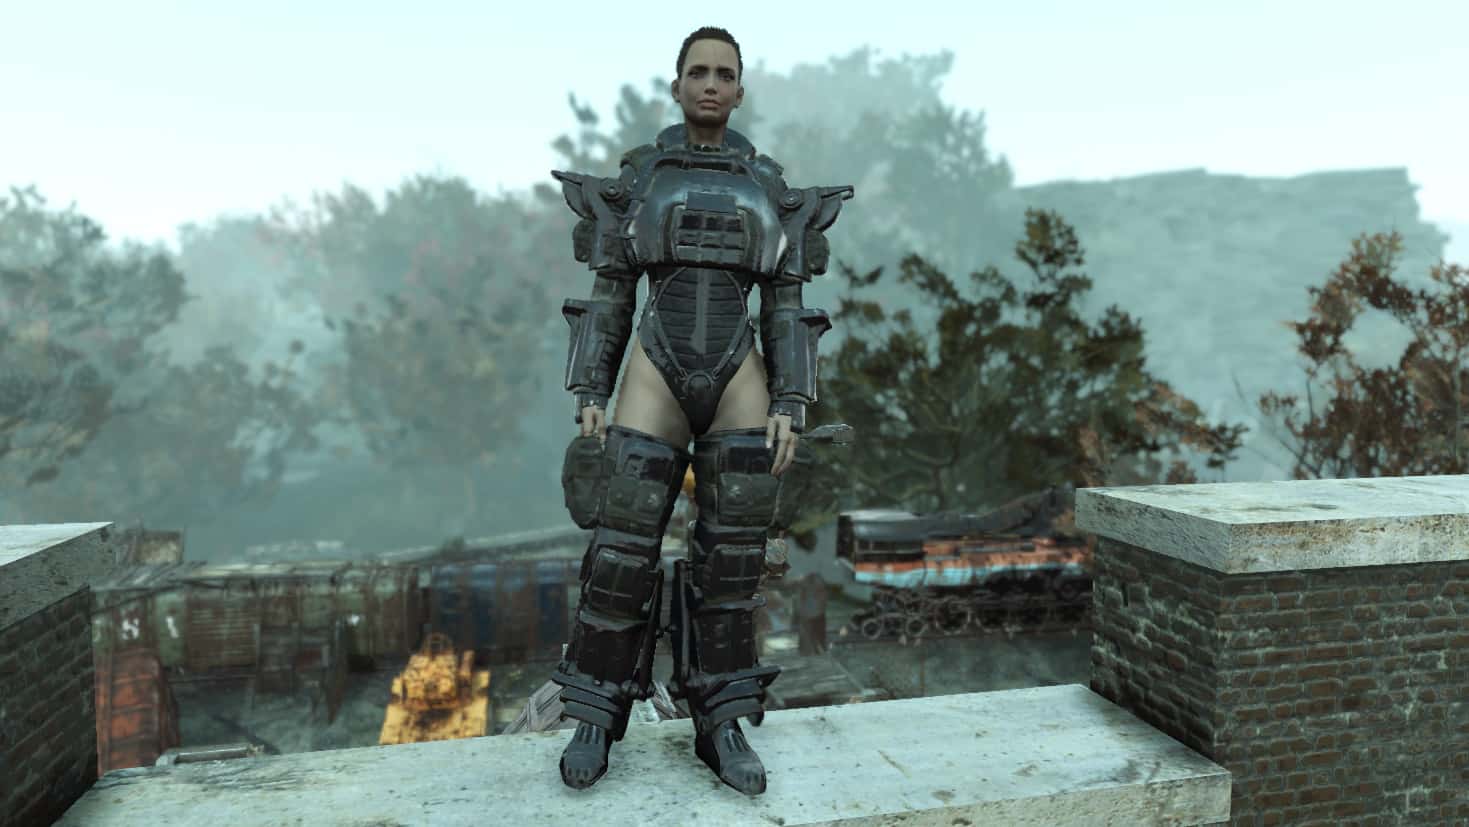 A conversion of my Fallout 4 marine armor to Fallout 76. 